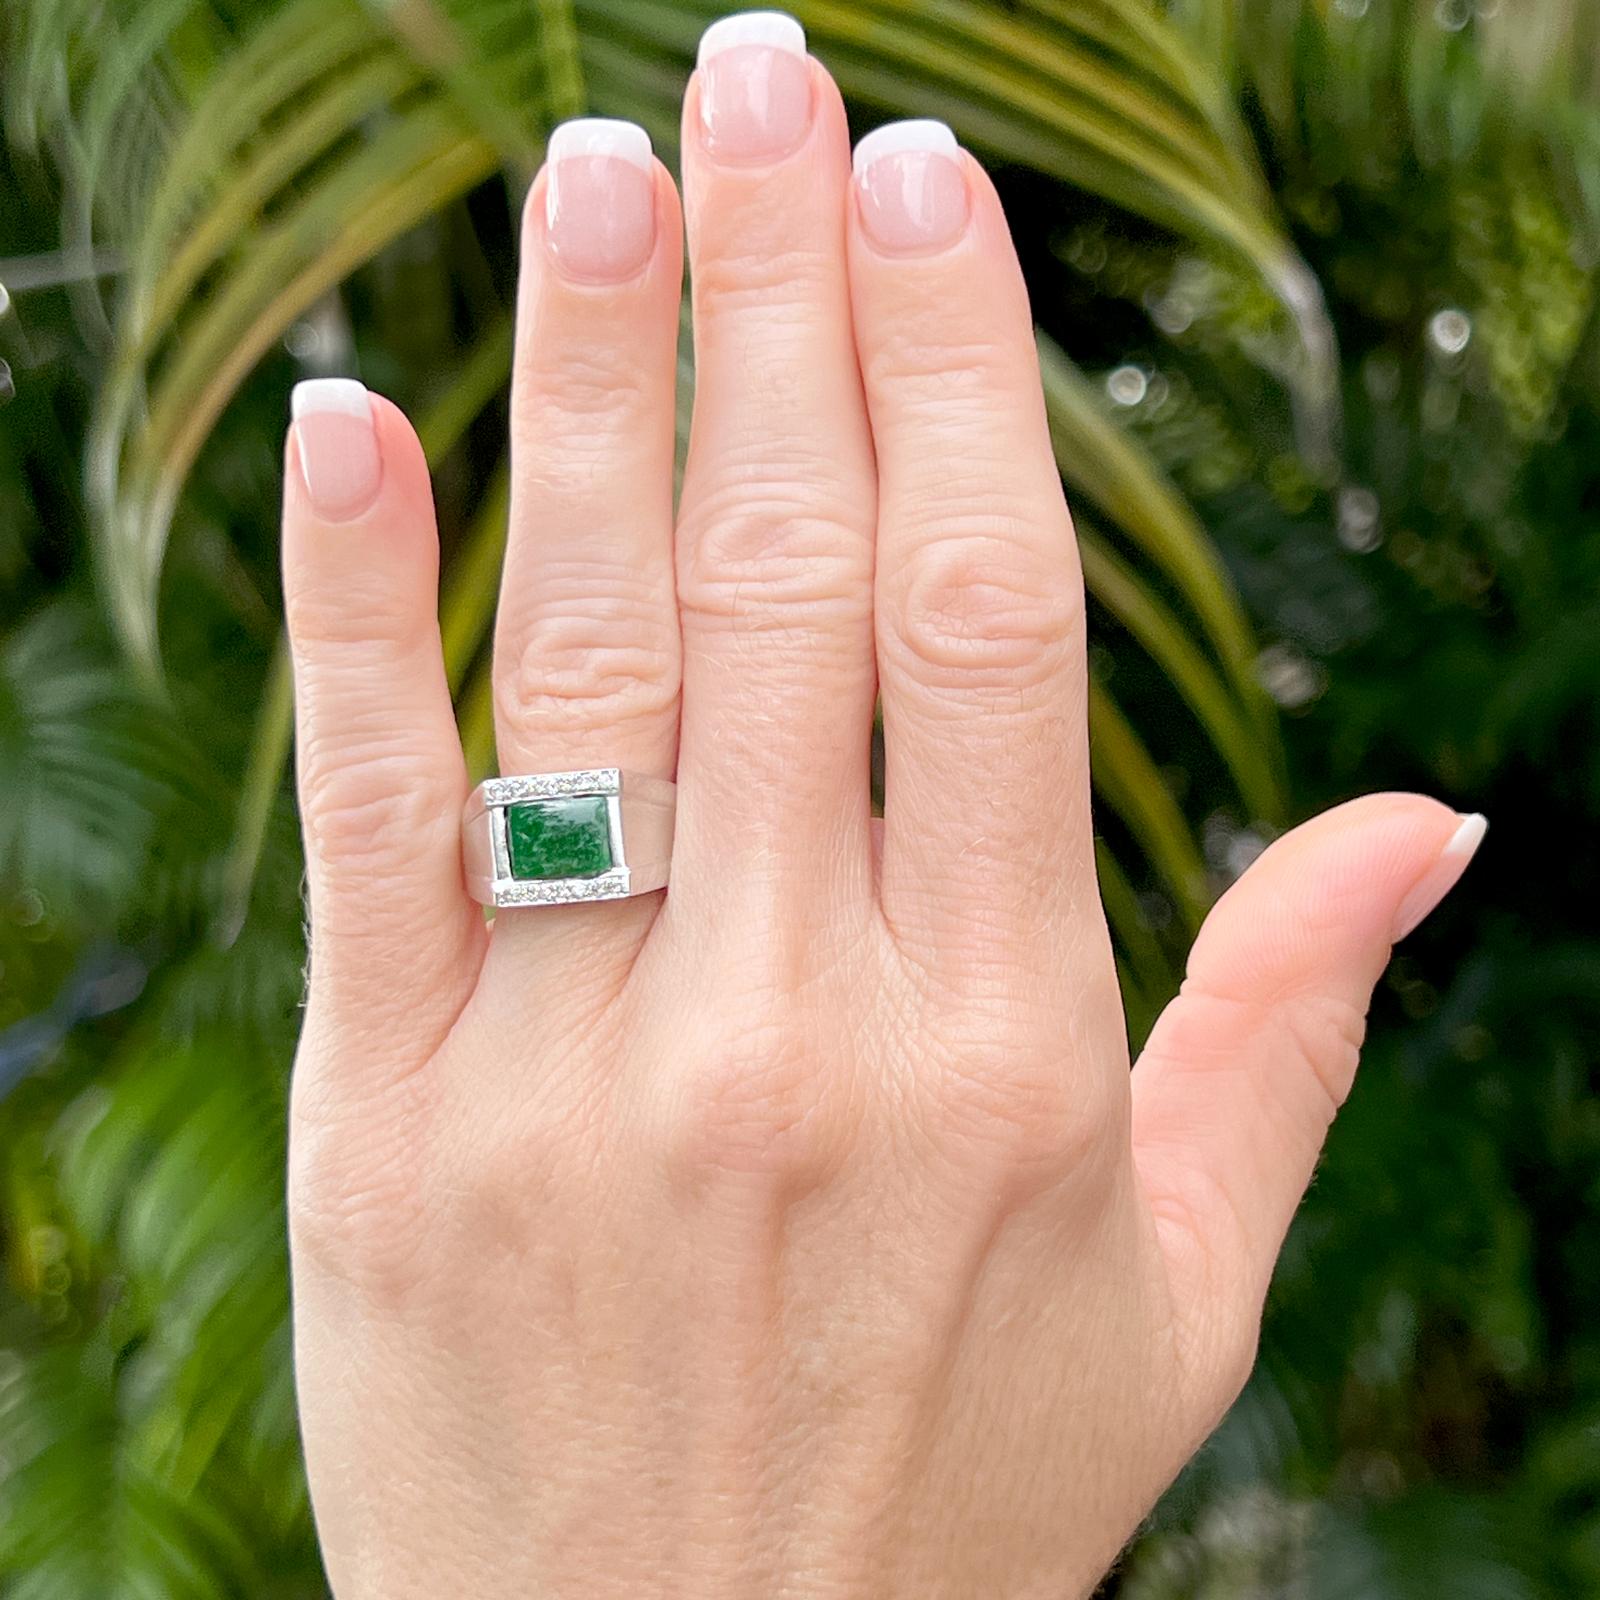 Jadeite and diamond ring crafted in 14 karat white gold. The ring features a cabochon cut deep green jadeite gemstone and 14 round brilliant cut diamonds weighing approximately .18 carat total weight. The diamonds are graded H-I color and SI